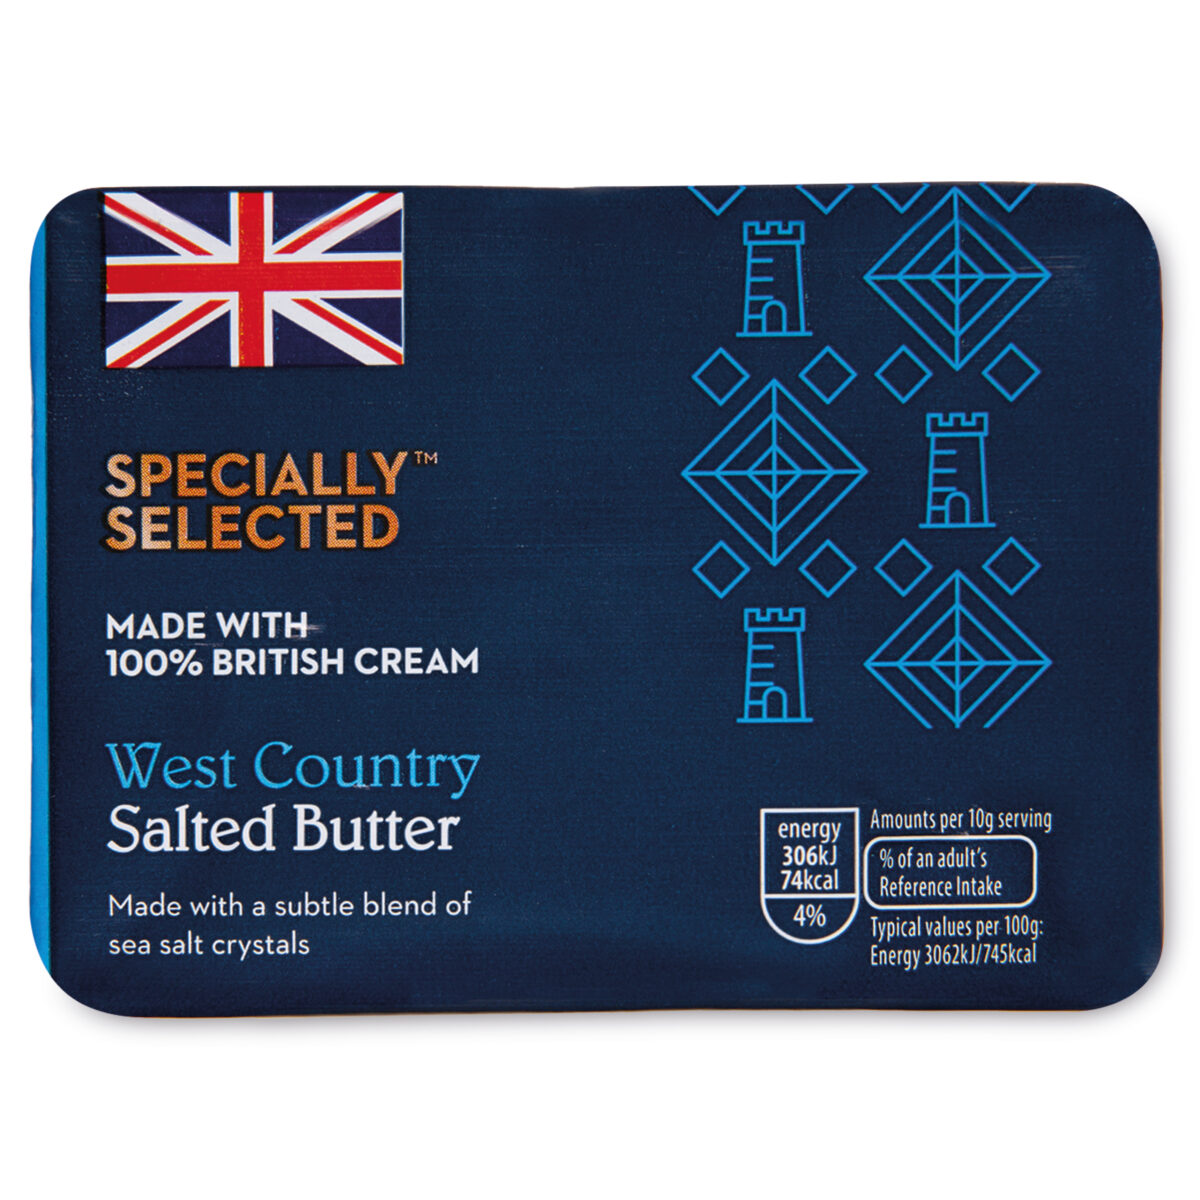 Aldi is rolling out recyclable butter packaging, a move it says will remove more than 10 tonnes of non-recyclable packaging each year.